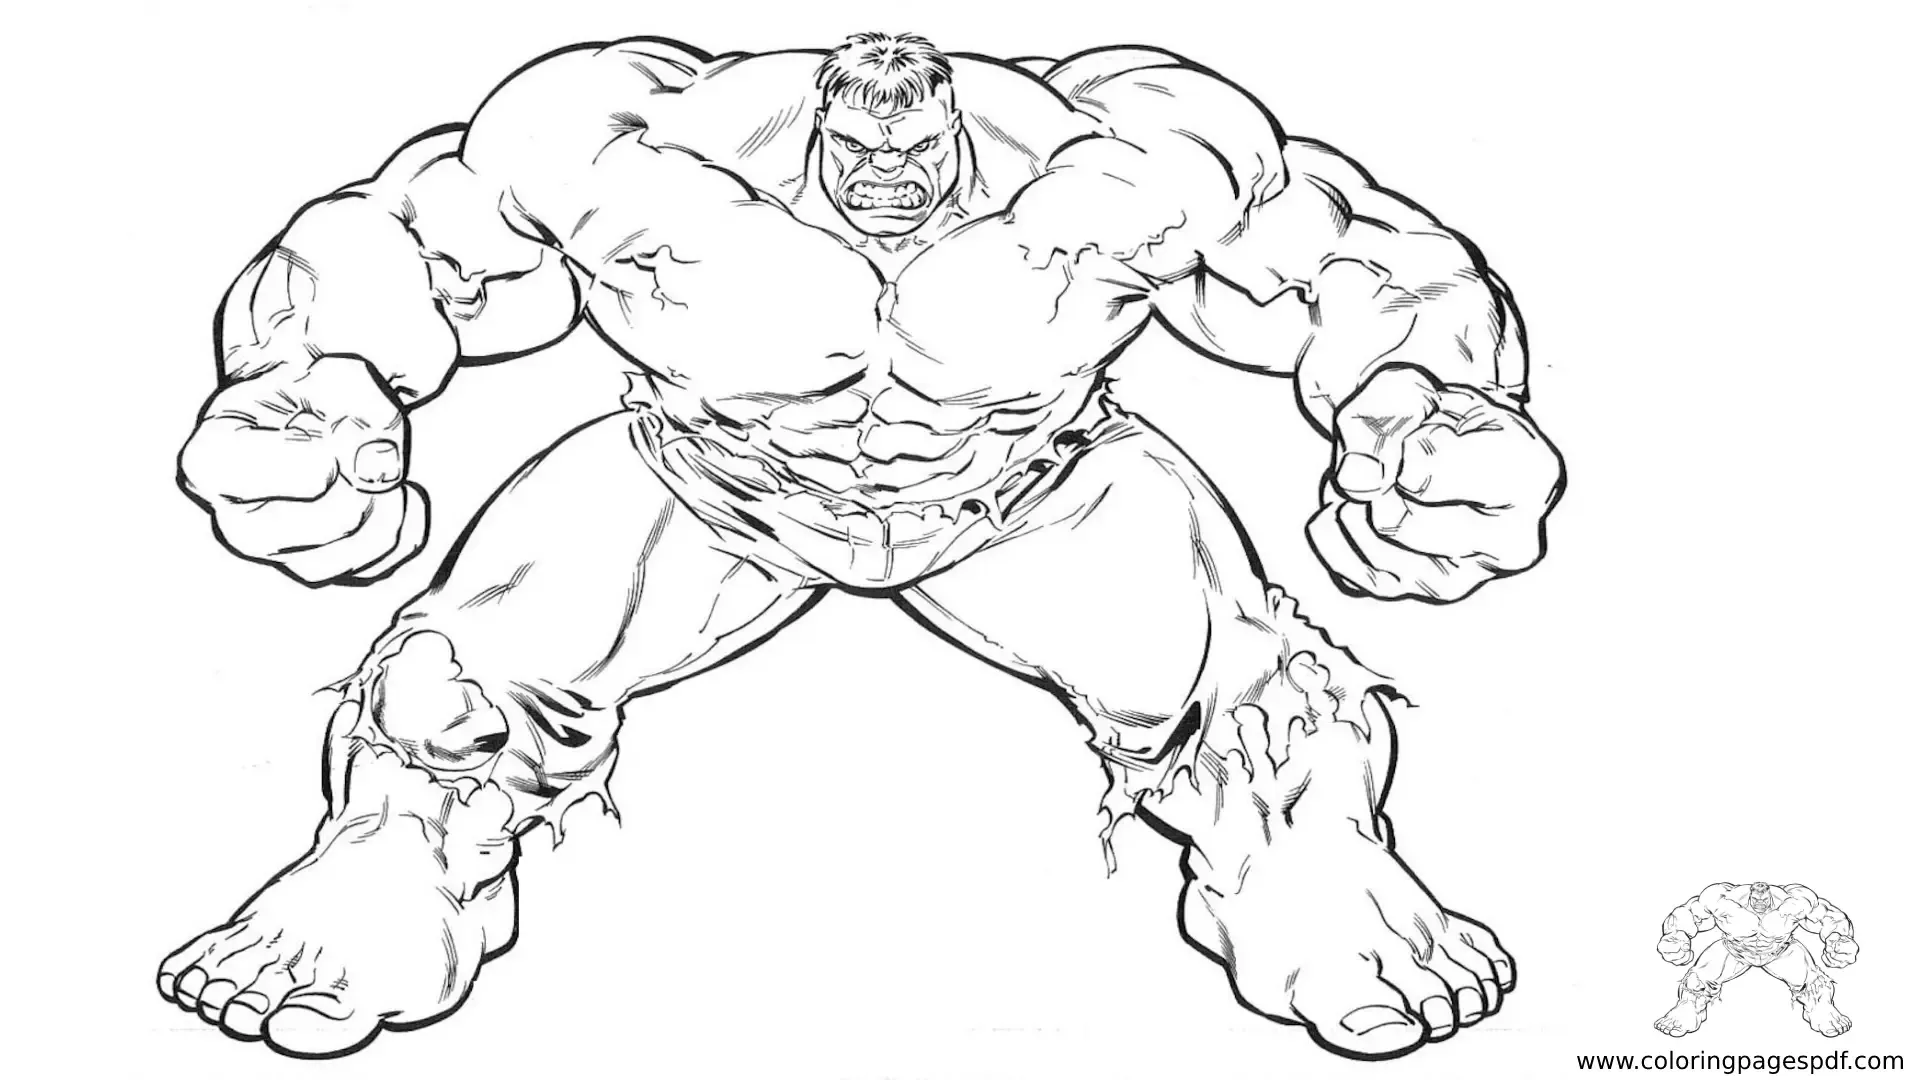 Coloring Pages Of Angry Hulk